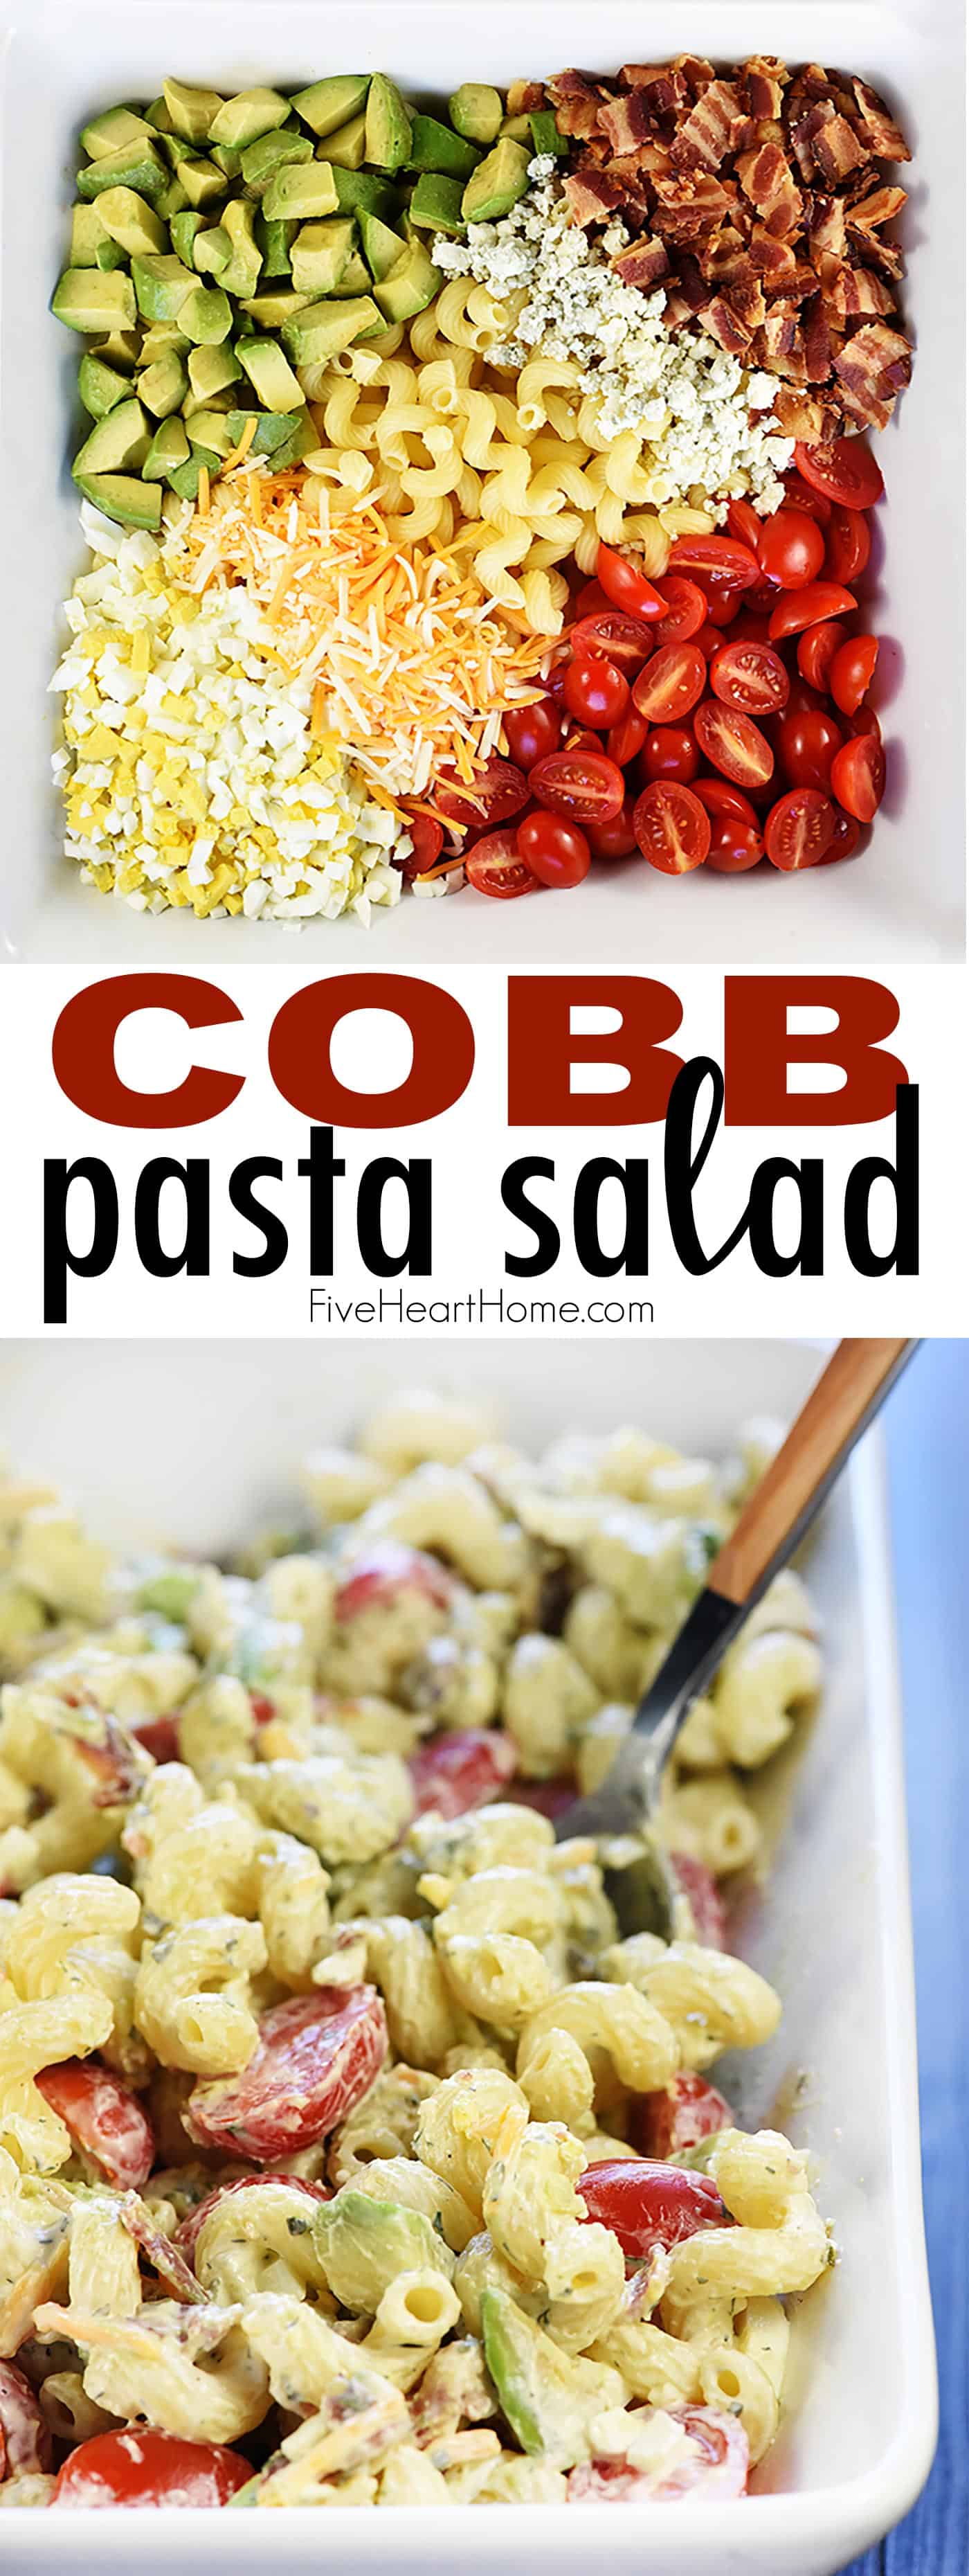 Cobb Pasta Salad ~ loaded with bacon, avocado, tomatoes, hard-boiled eggs, cheese, and homemade ranch dressing, this is the perfect recipe for summer picnics, potlucks, parties, and barbecues! | FiveHeartHome.com via @fivehearthome